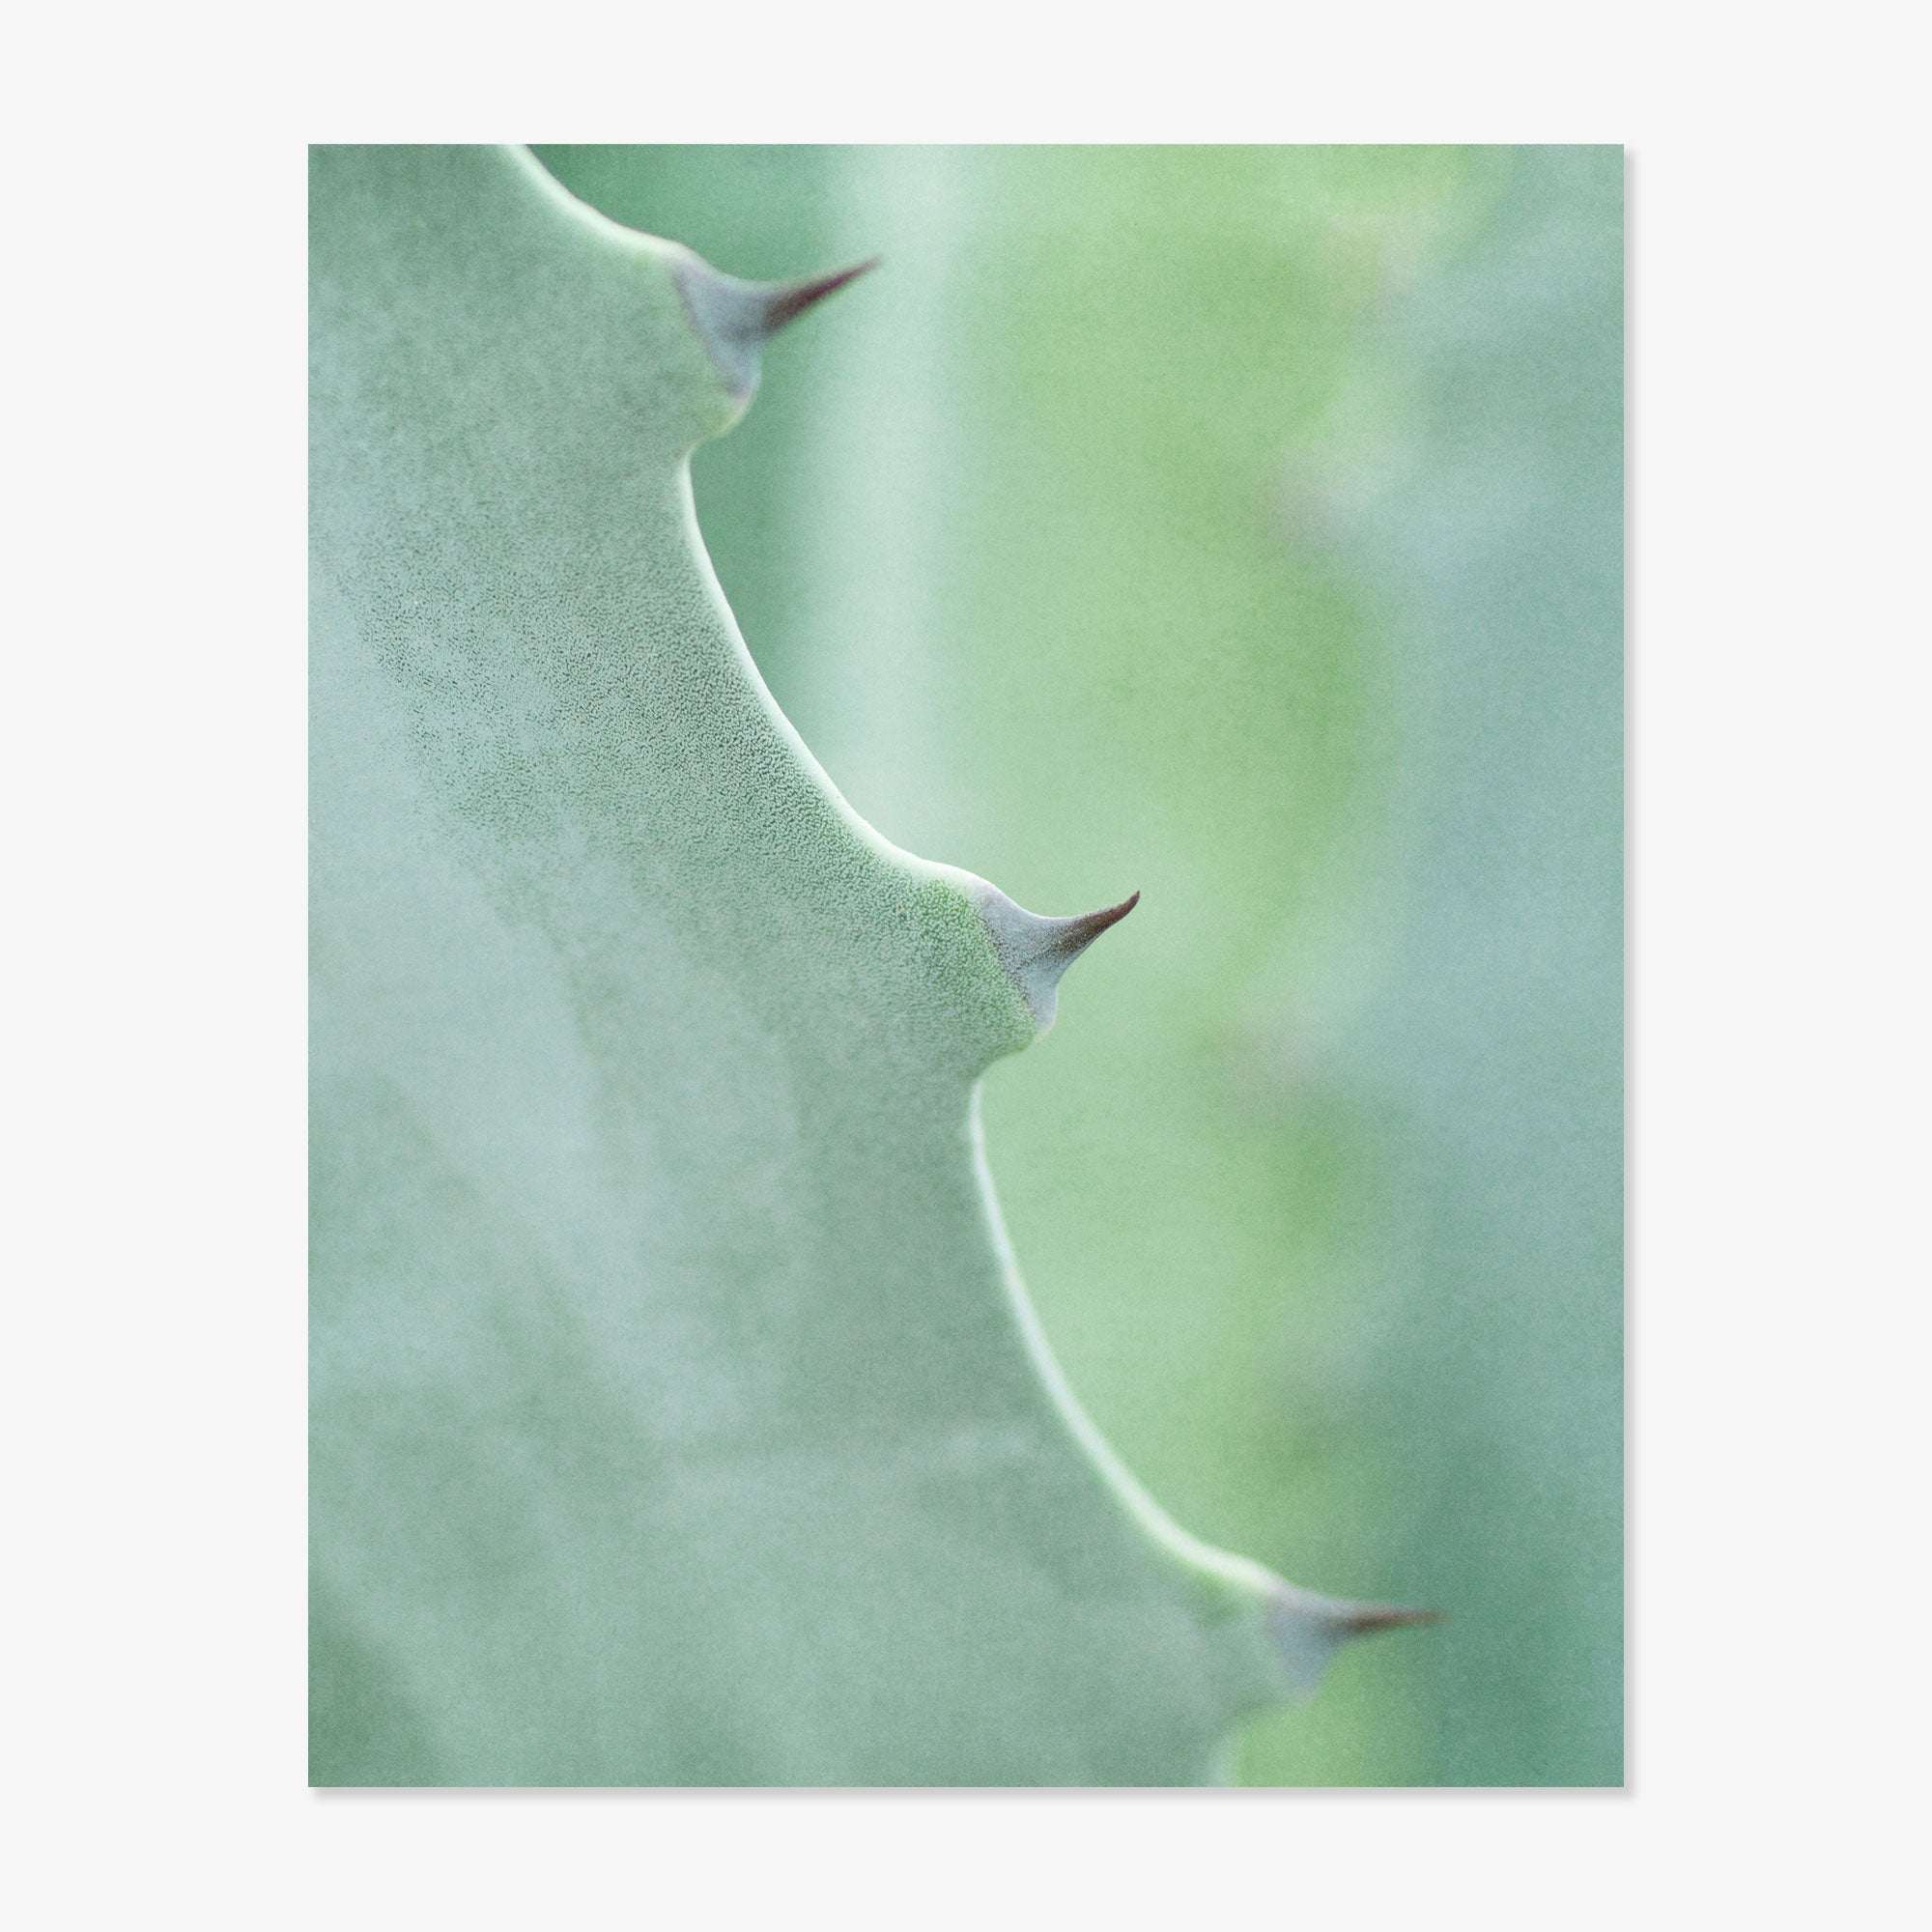 Close-up image of an Offley Green &#39;Desert Fireworks II&#39; edge showing detailed texture and sharp thorns against a softly blurred green background, captured on archival photographic paper.